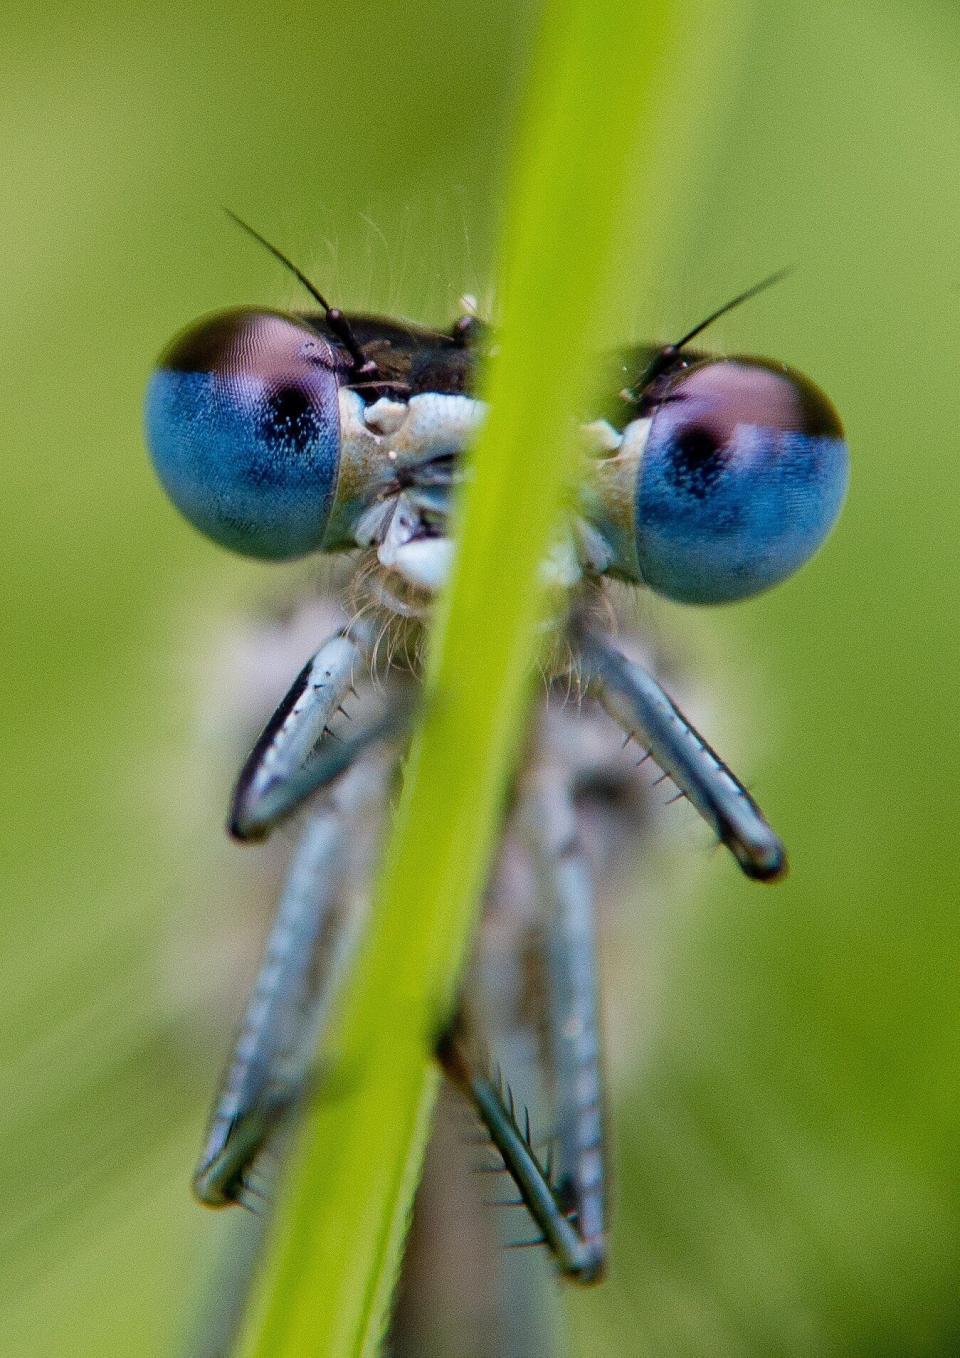 A blue damselfly (<em>Platycnemis pennipes</em>) rests on a reed at the edge of a small lake near Briesen, Germany, on May 13, 2012. Dragonflies are evidently amongst the oldest flying insects with around 5000 known species worldwide. Only 80 dragonfly species can be found in Germany.  (PATRICK PLEUL/AFP/GettyImages)